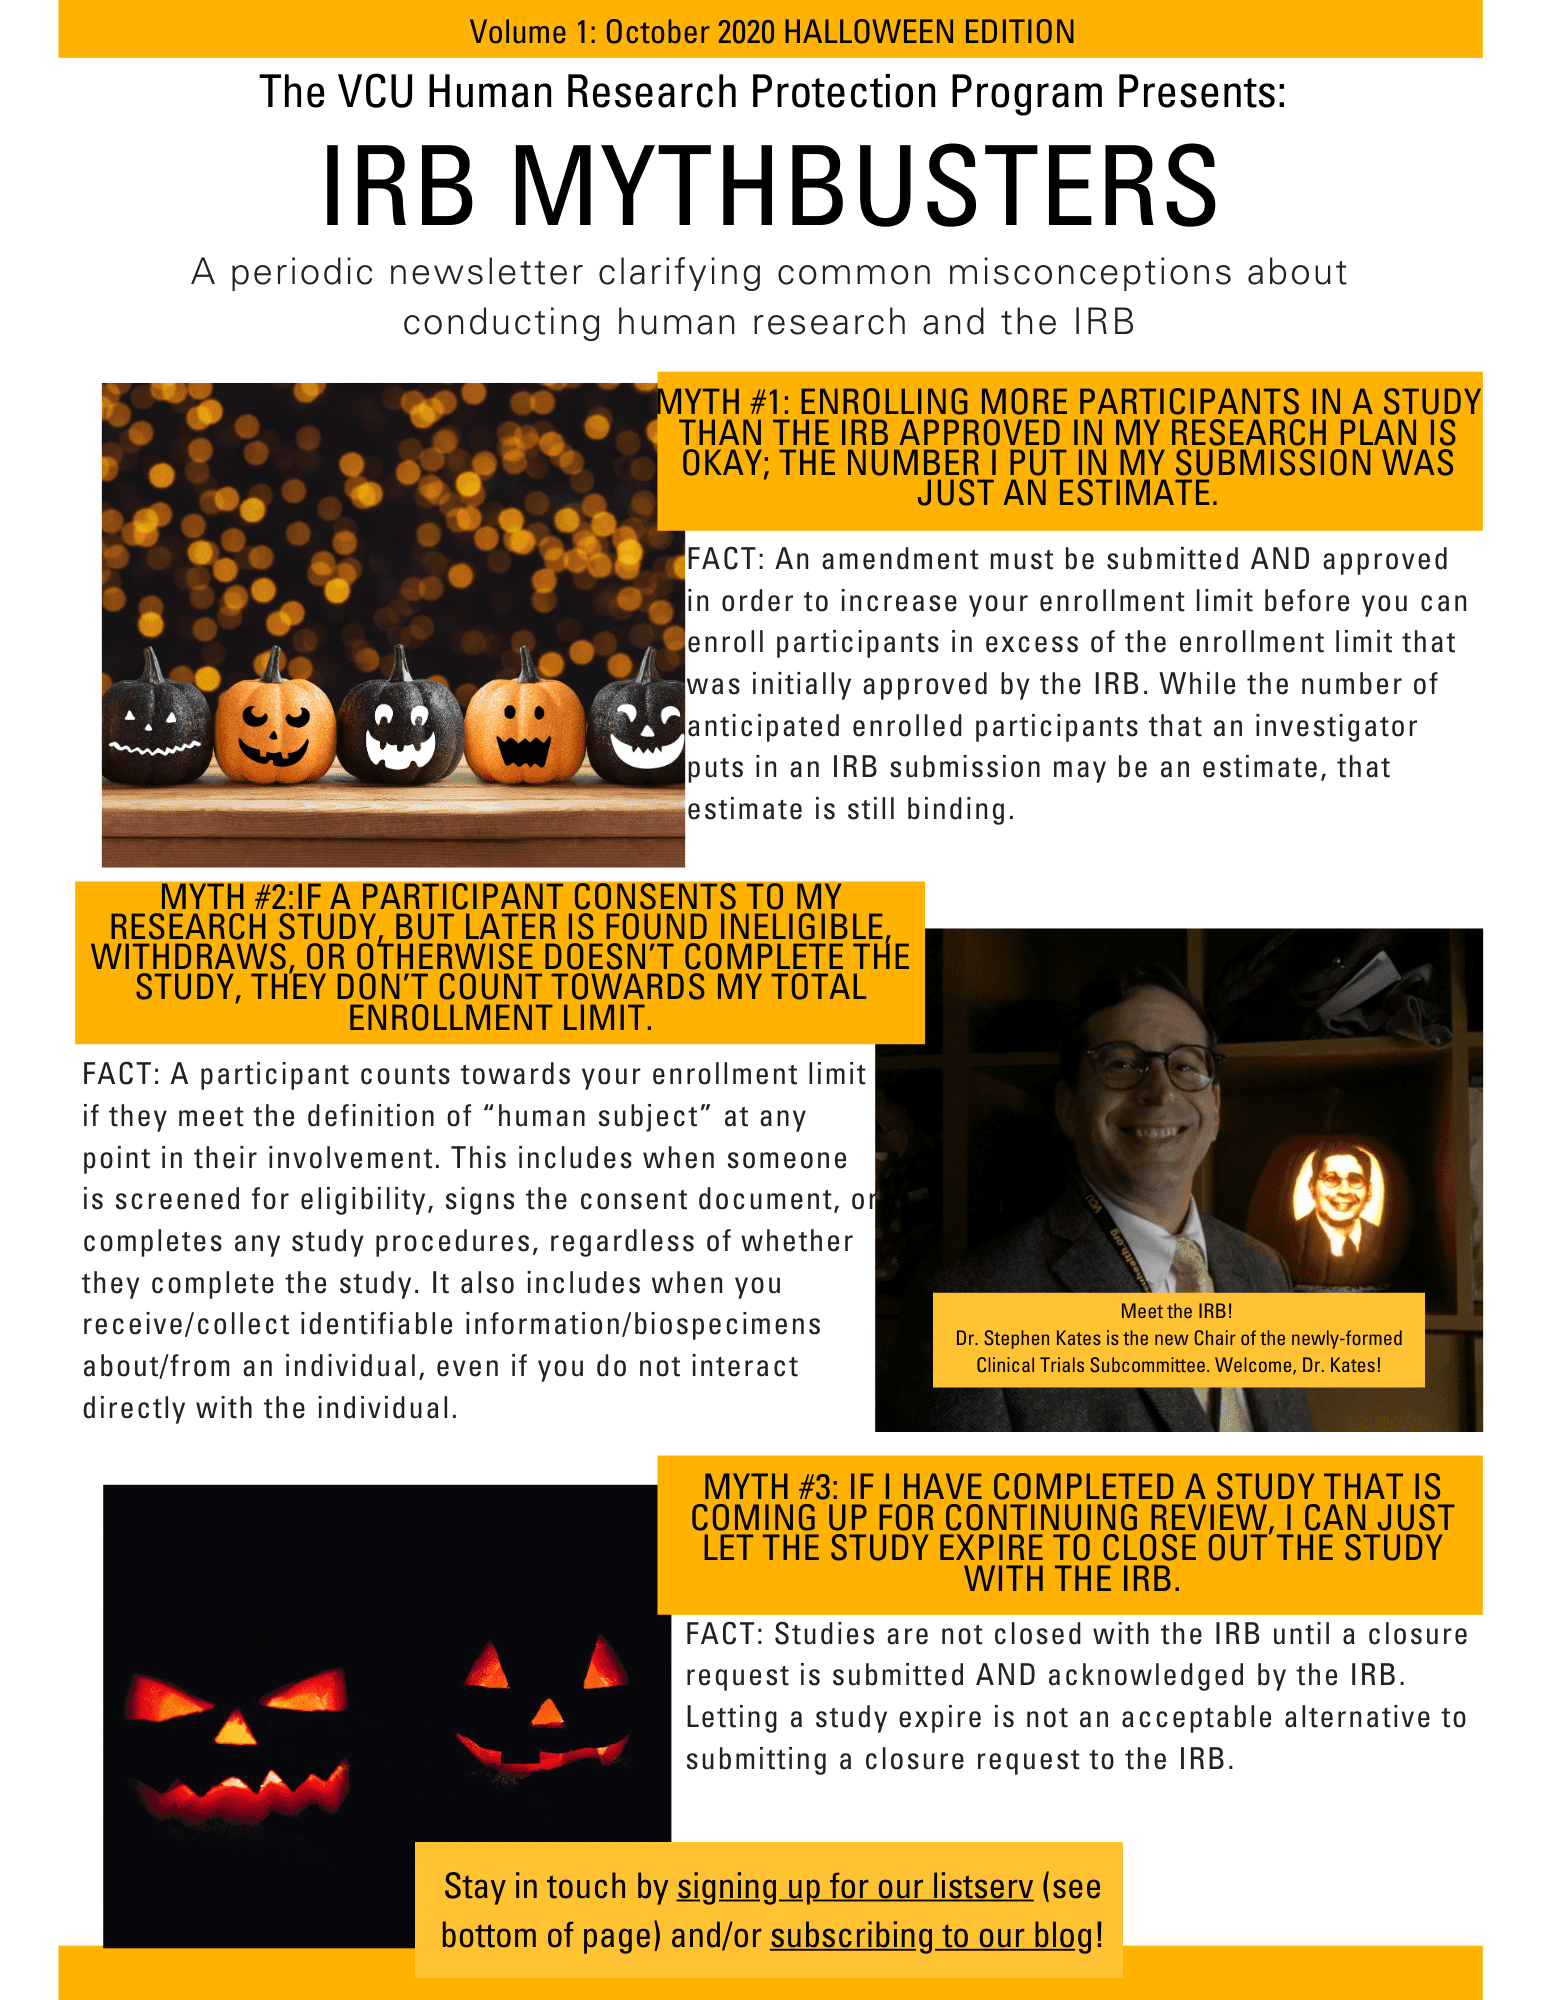 An image of the "IRB Mythbusters" Newsletter. It contains the same three myths and facts as the blog post. It also contains three pictures: one is an image of a line of pumpkins with painted faces, and one is an image of silhouettes of jack-o-lantern faces. The third photo is of a smiling white man wearing glasses, and he is standing next to a pumpkin that is carved with a face that looks like his. The text beneath the photo says "Meet the IRB! Dr. Stephen Kates is the new Chair of the newly-formed Clinical Trials Subcommittee. Welcome, Dr. Kates!"